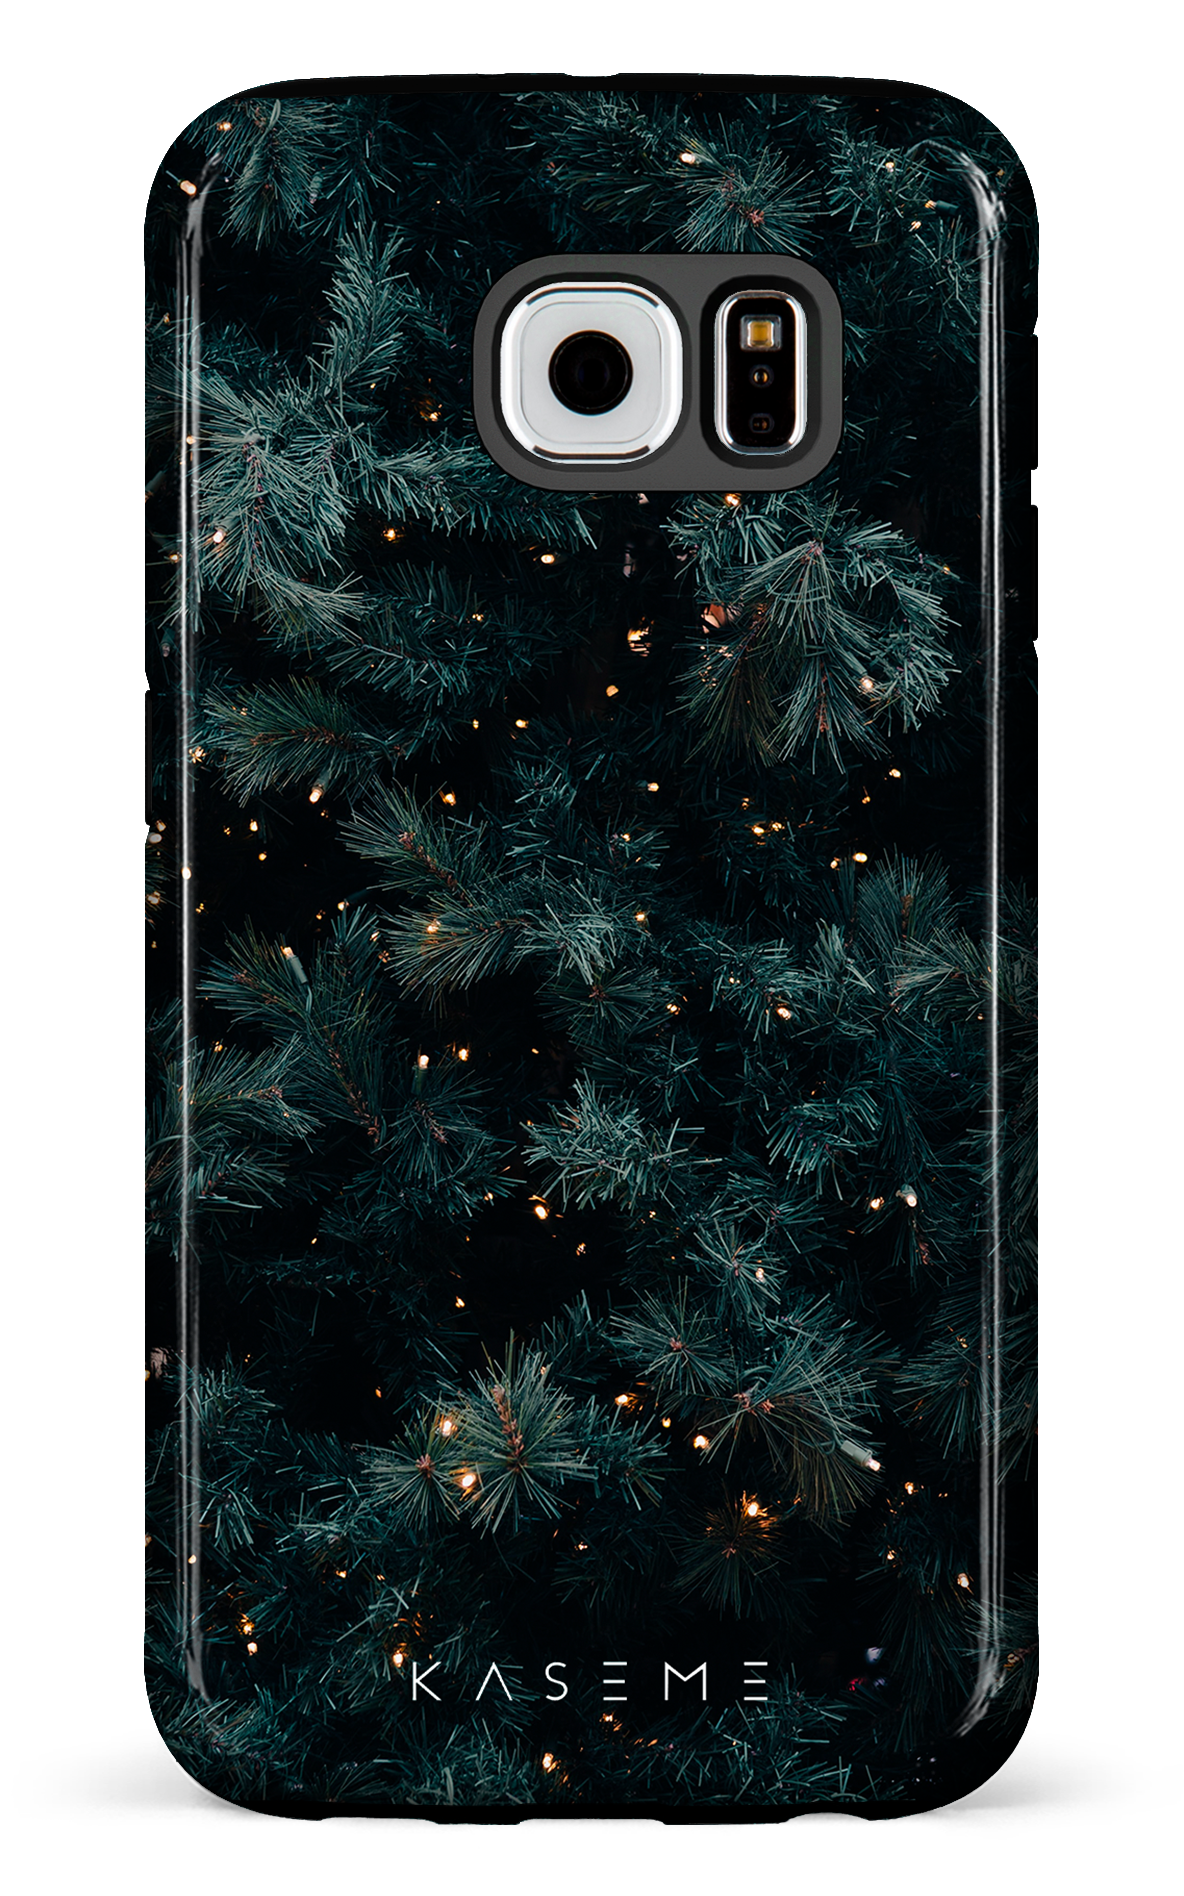 Merry and Bright - Galaxy S6